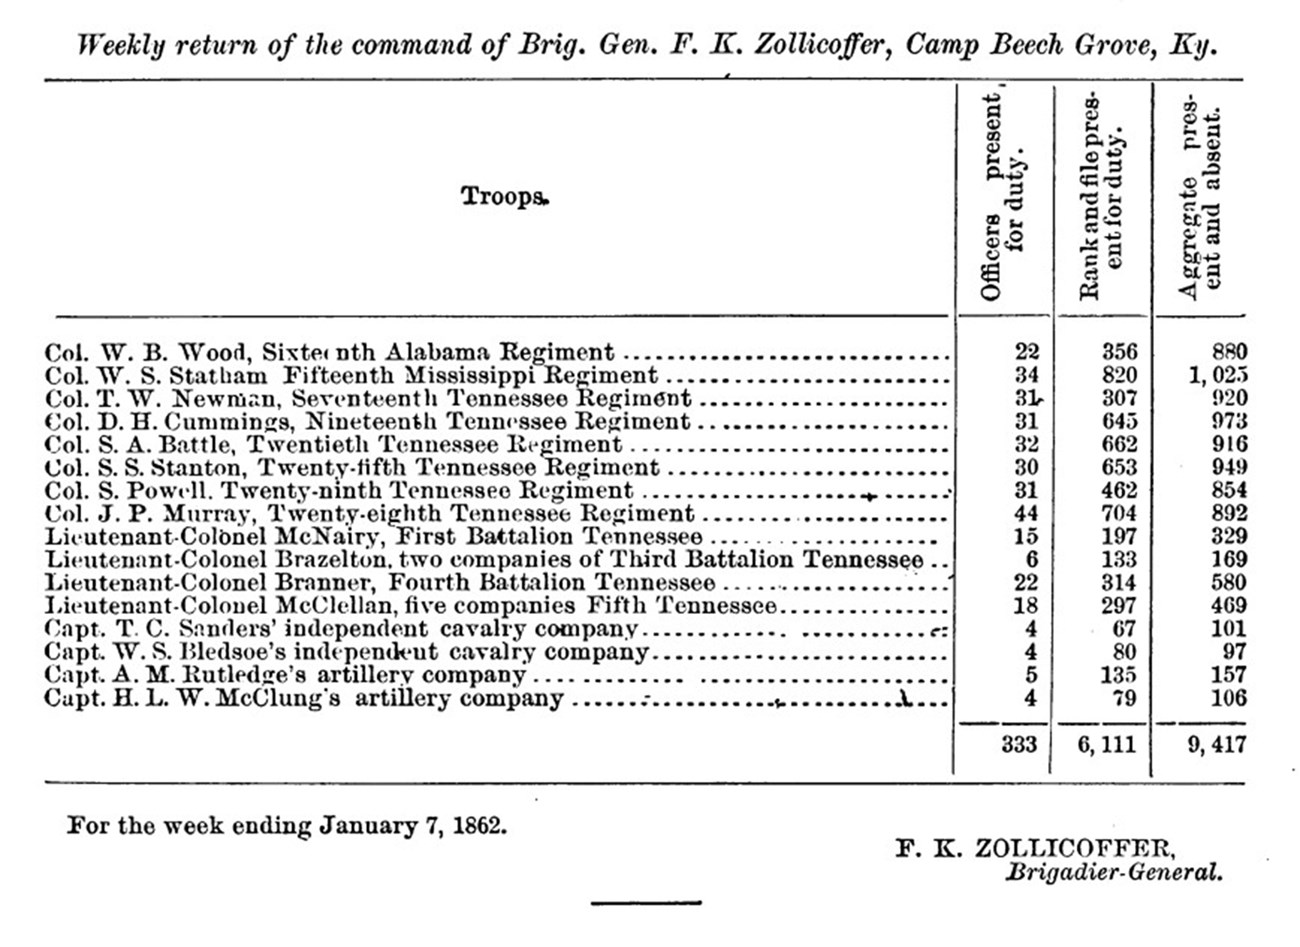 A screen shot of a page from the Official Records of the Civil War